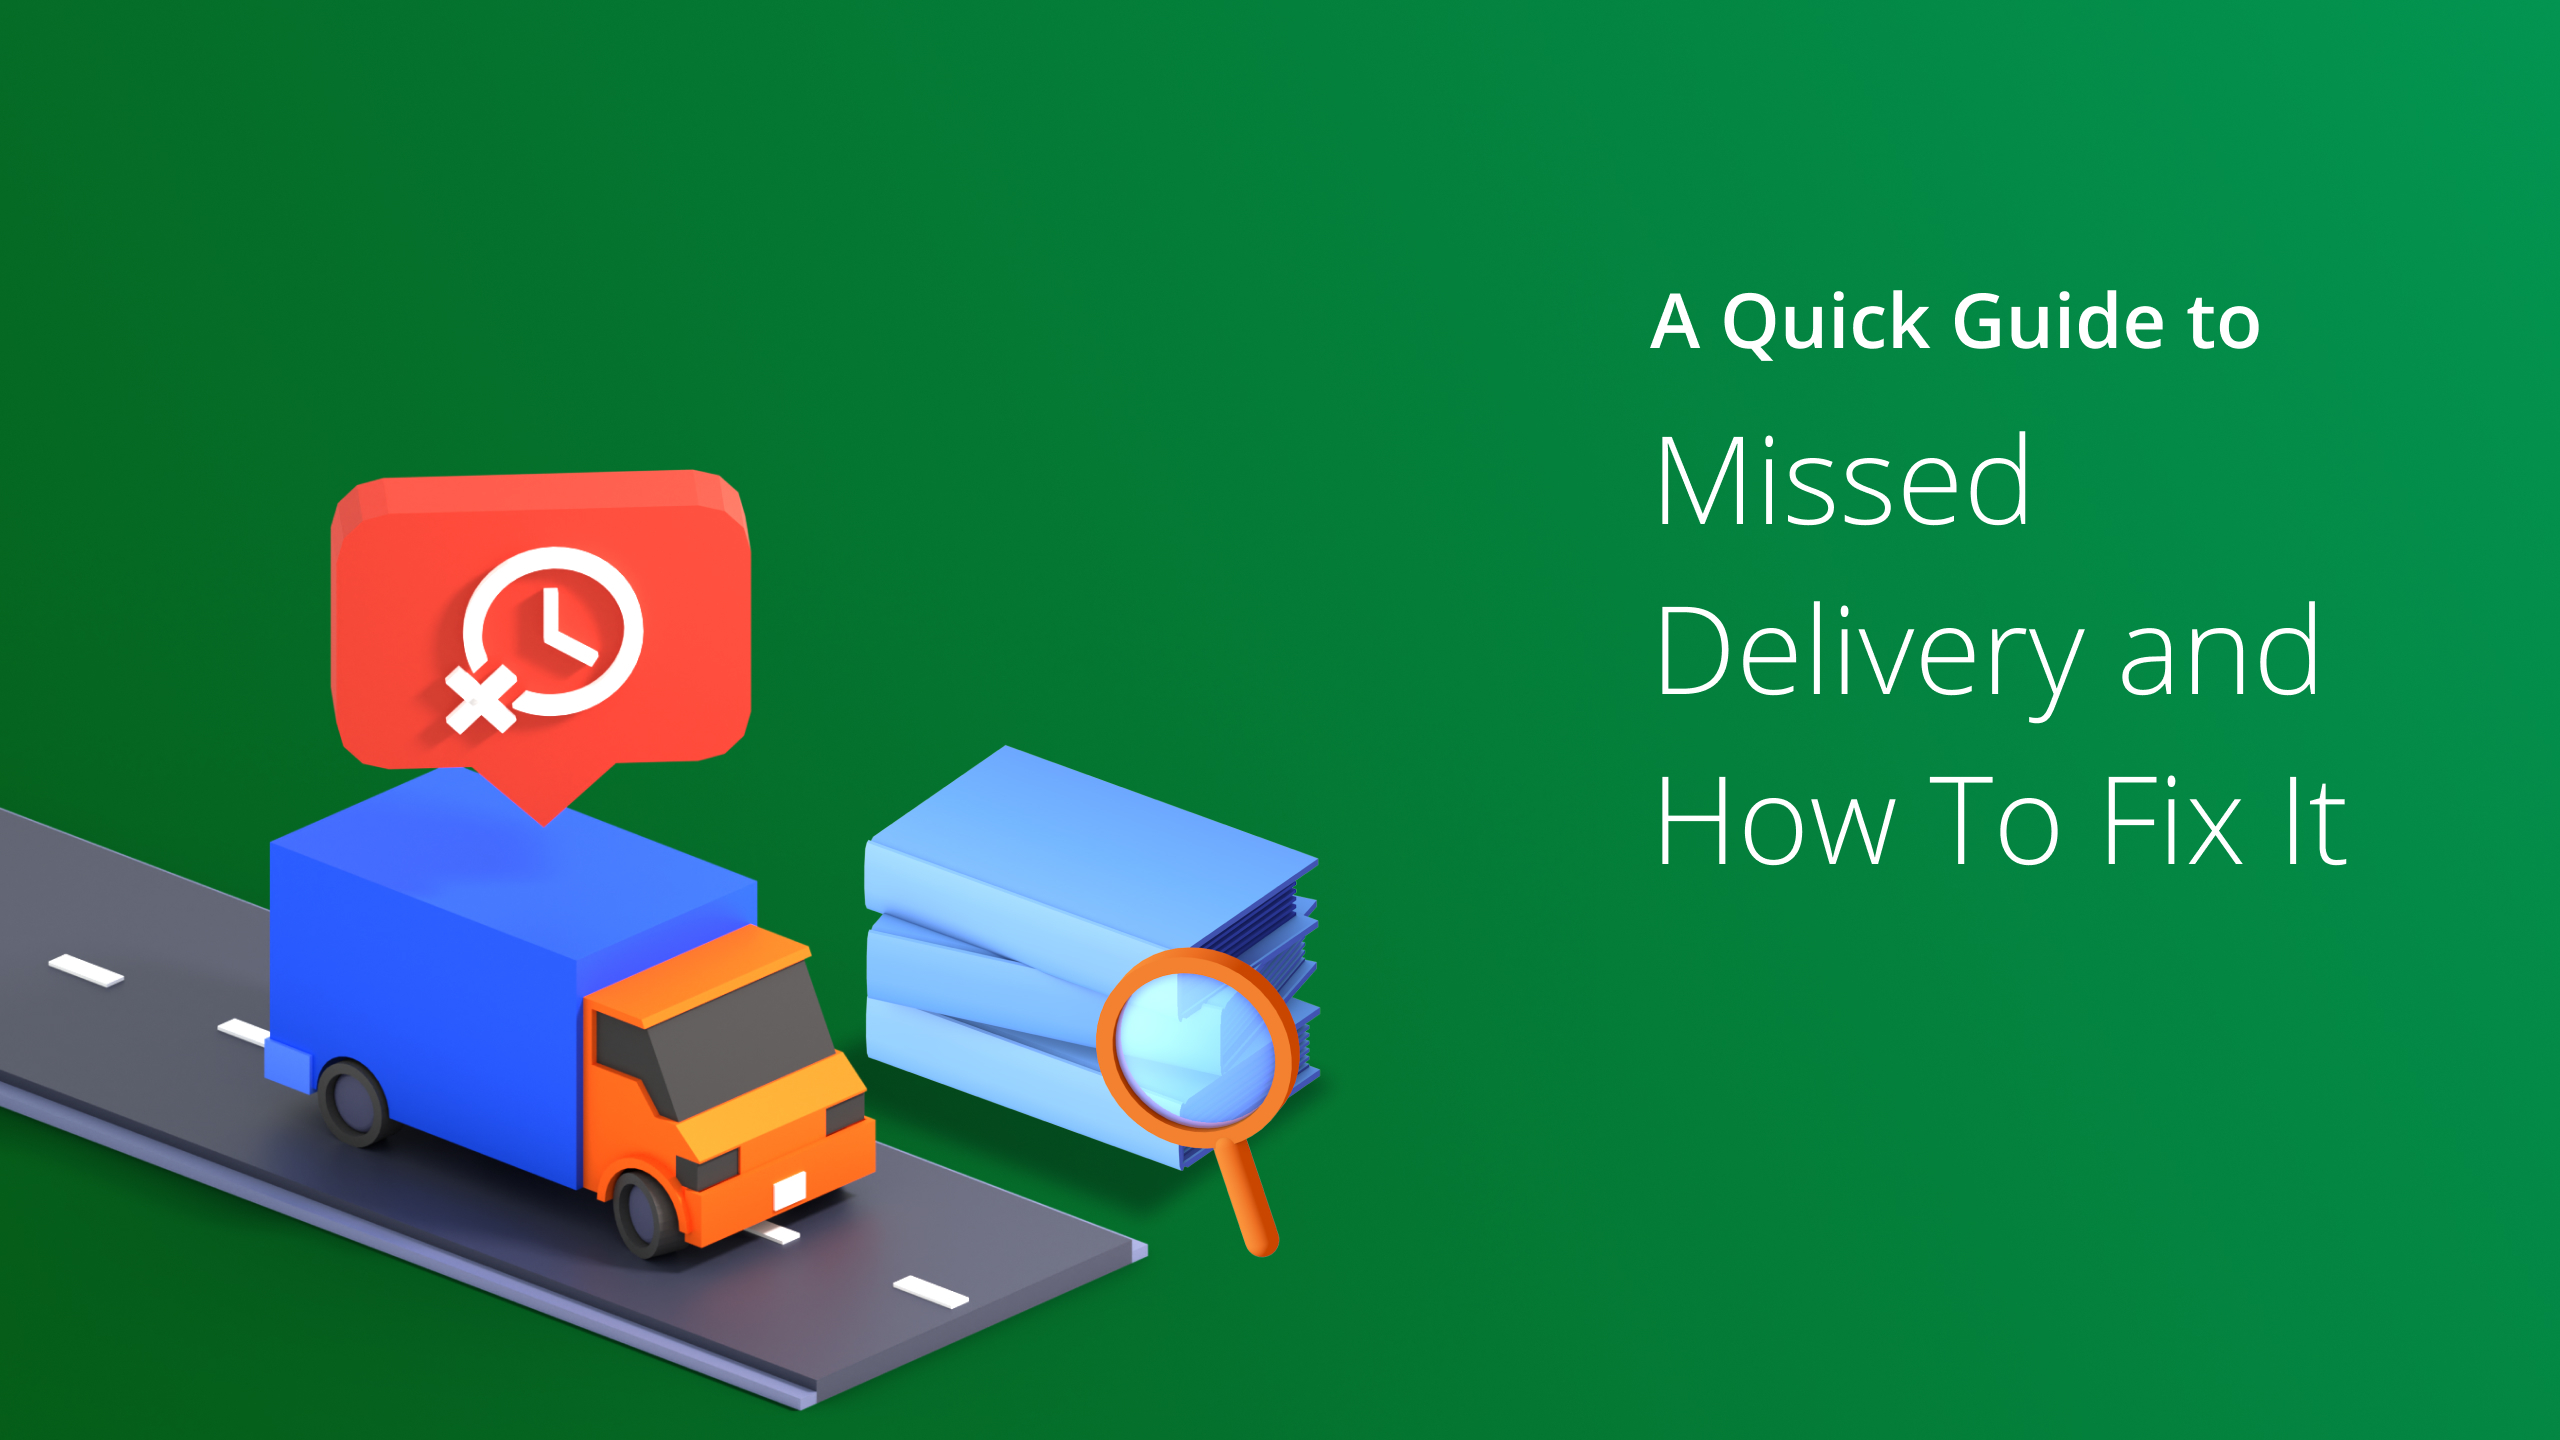 The concept of missed delivery